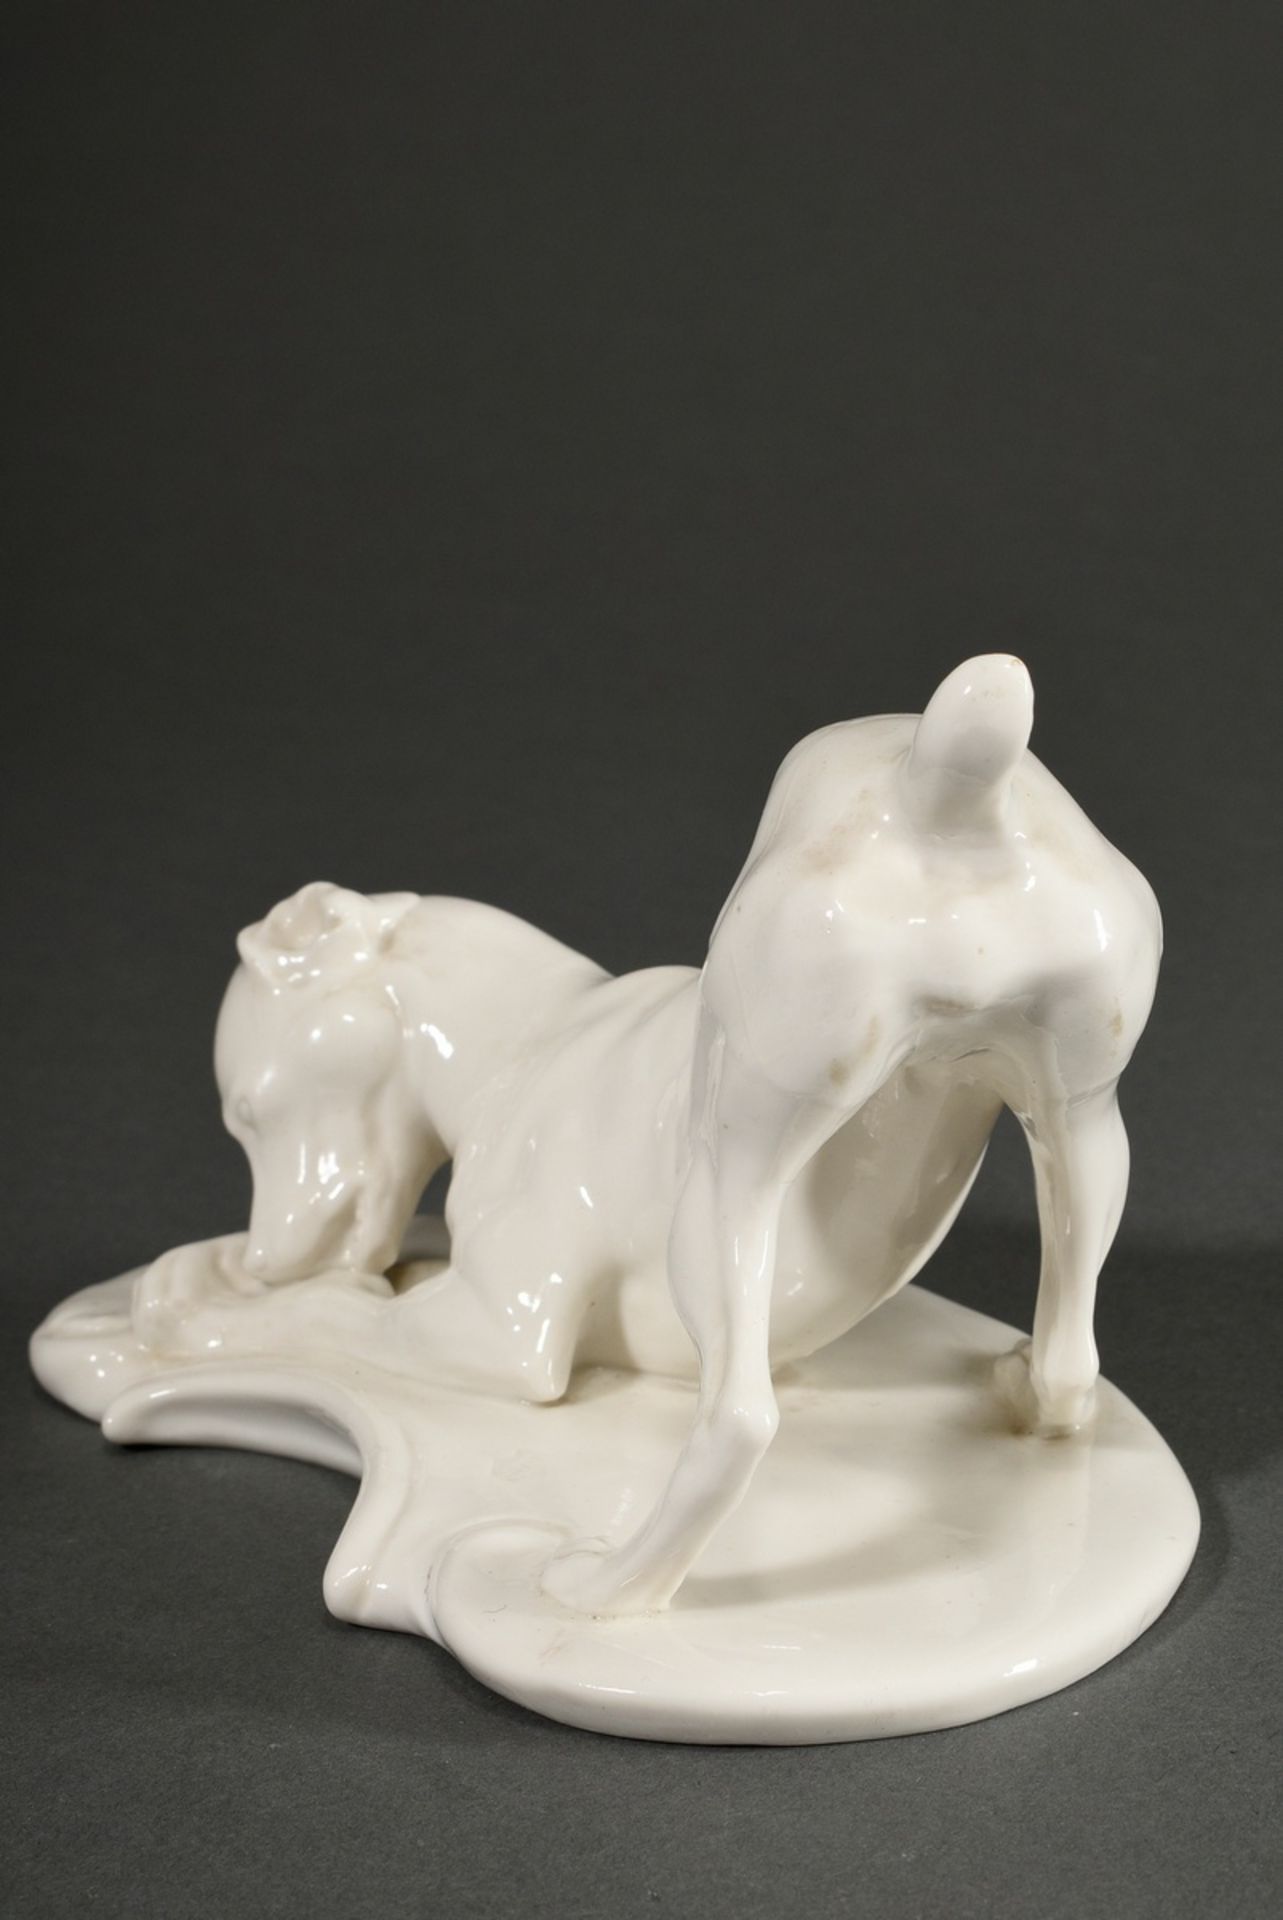 Nymphenburg figurine "Young Fox Terrier" 1913, designed by Theodor Kärner, 10x15.5x9.5cm - Image 3 of 4